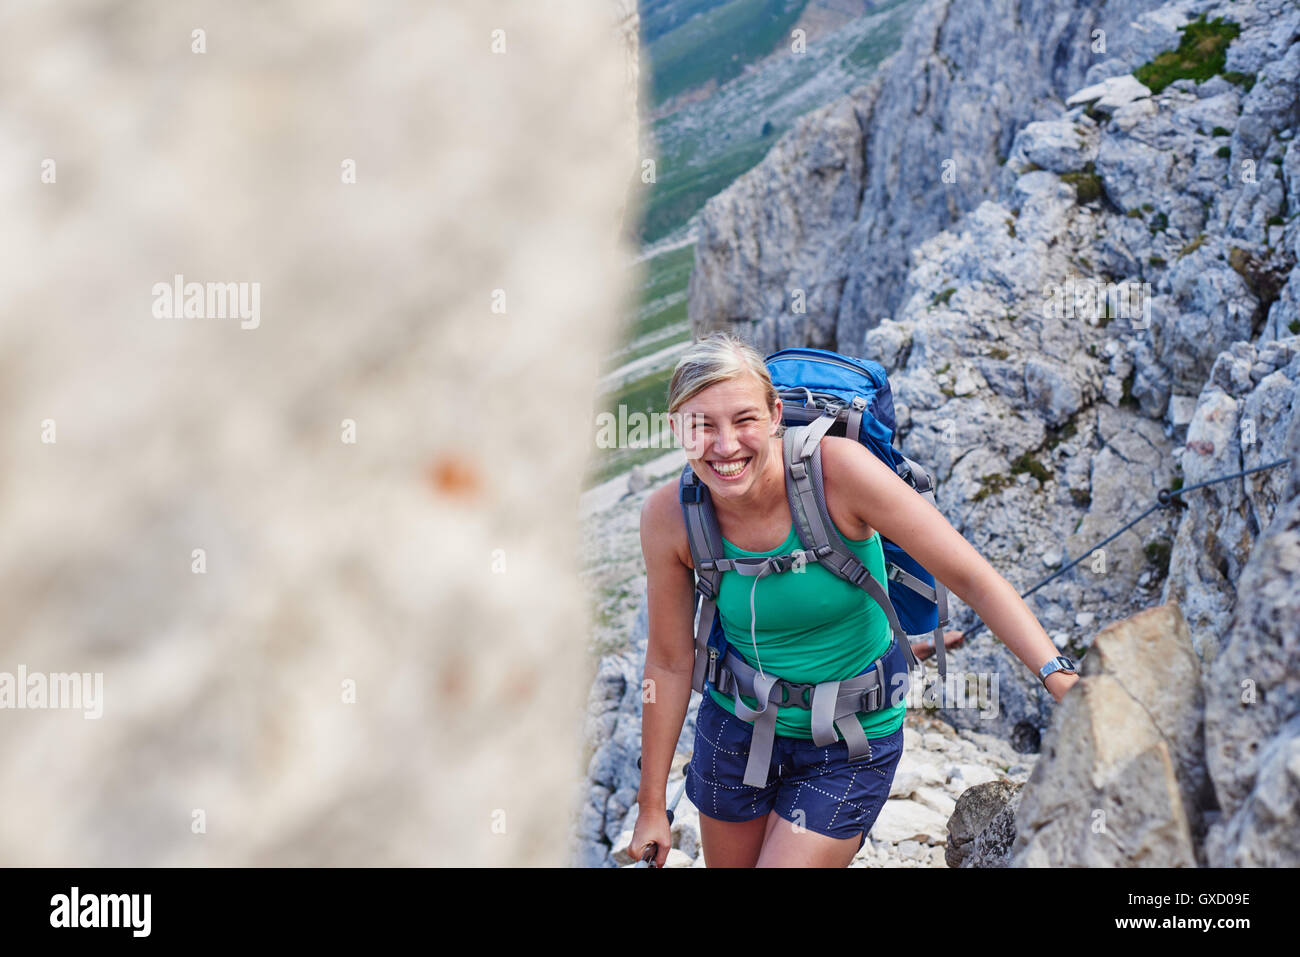 Woman hiking up mountain looking at camera smiling, Austria Stock Photo